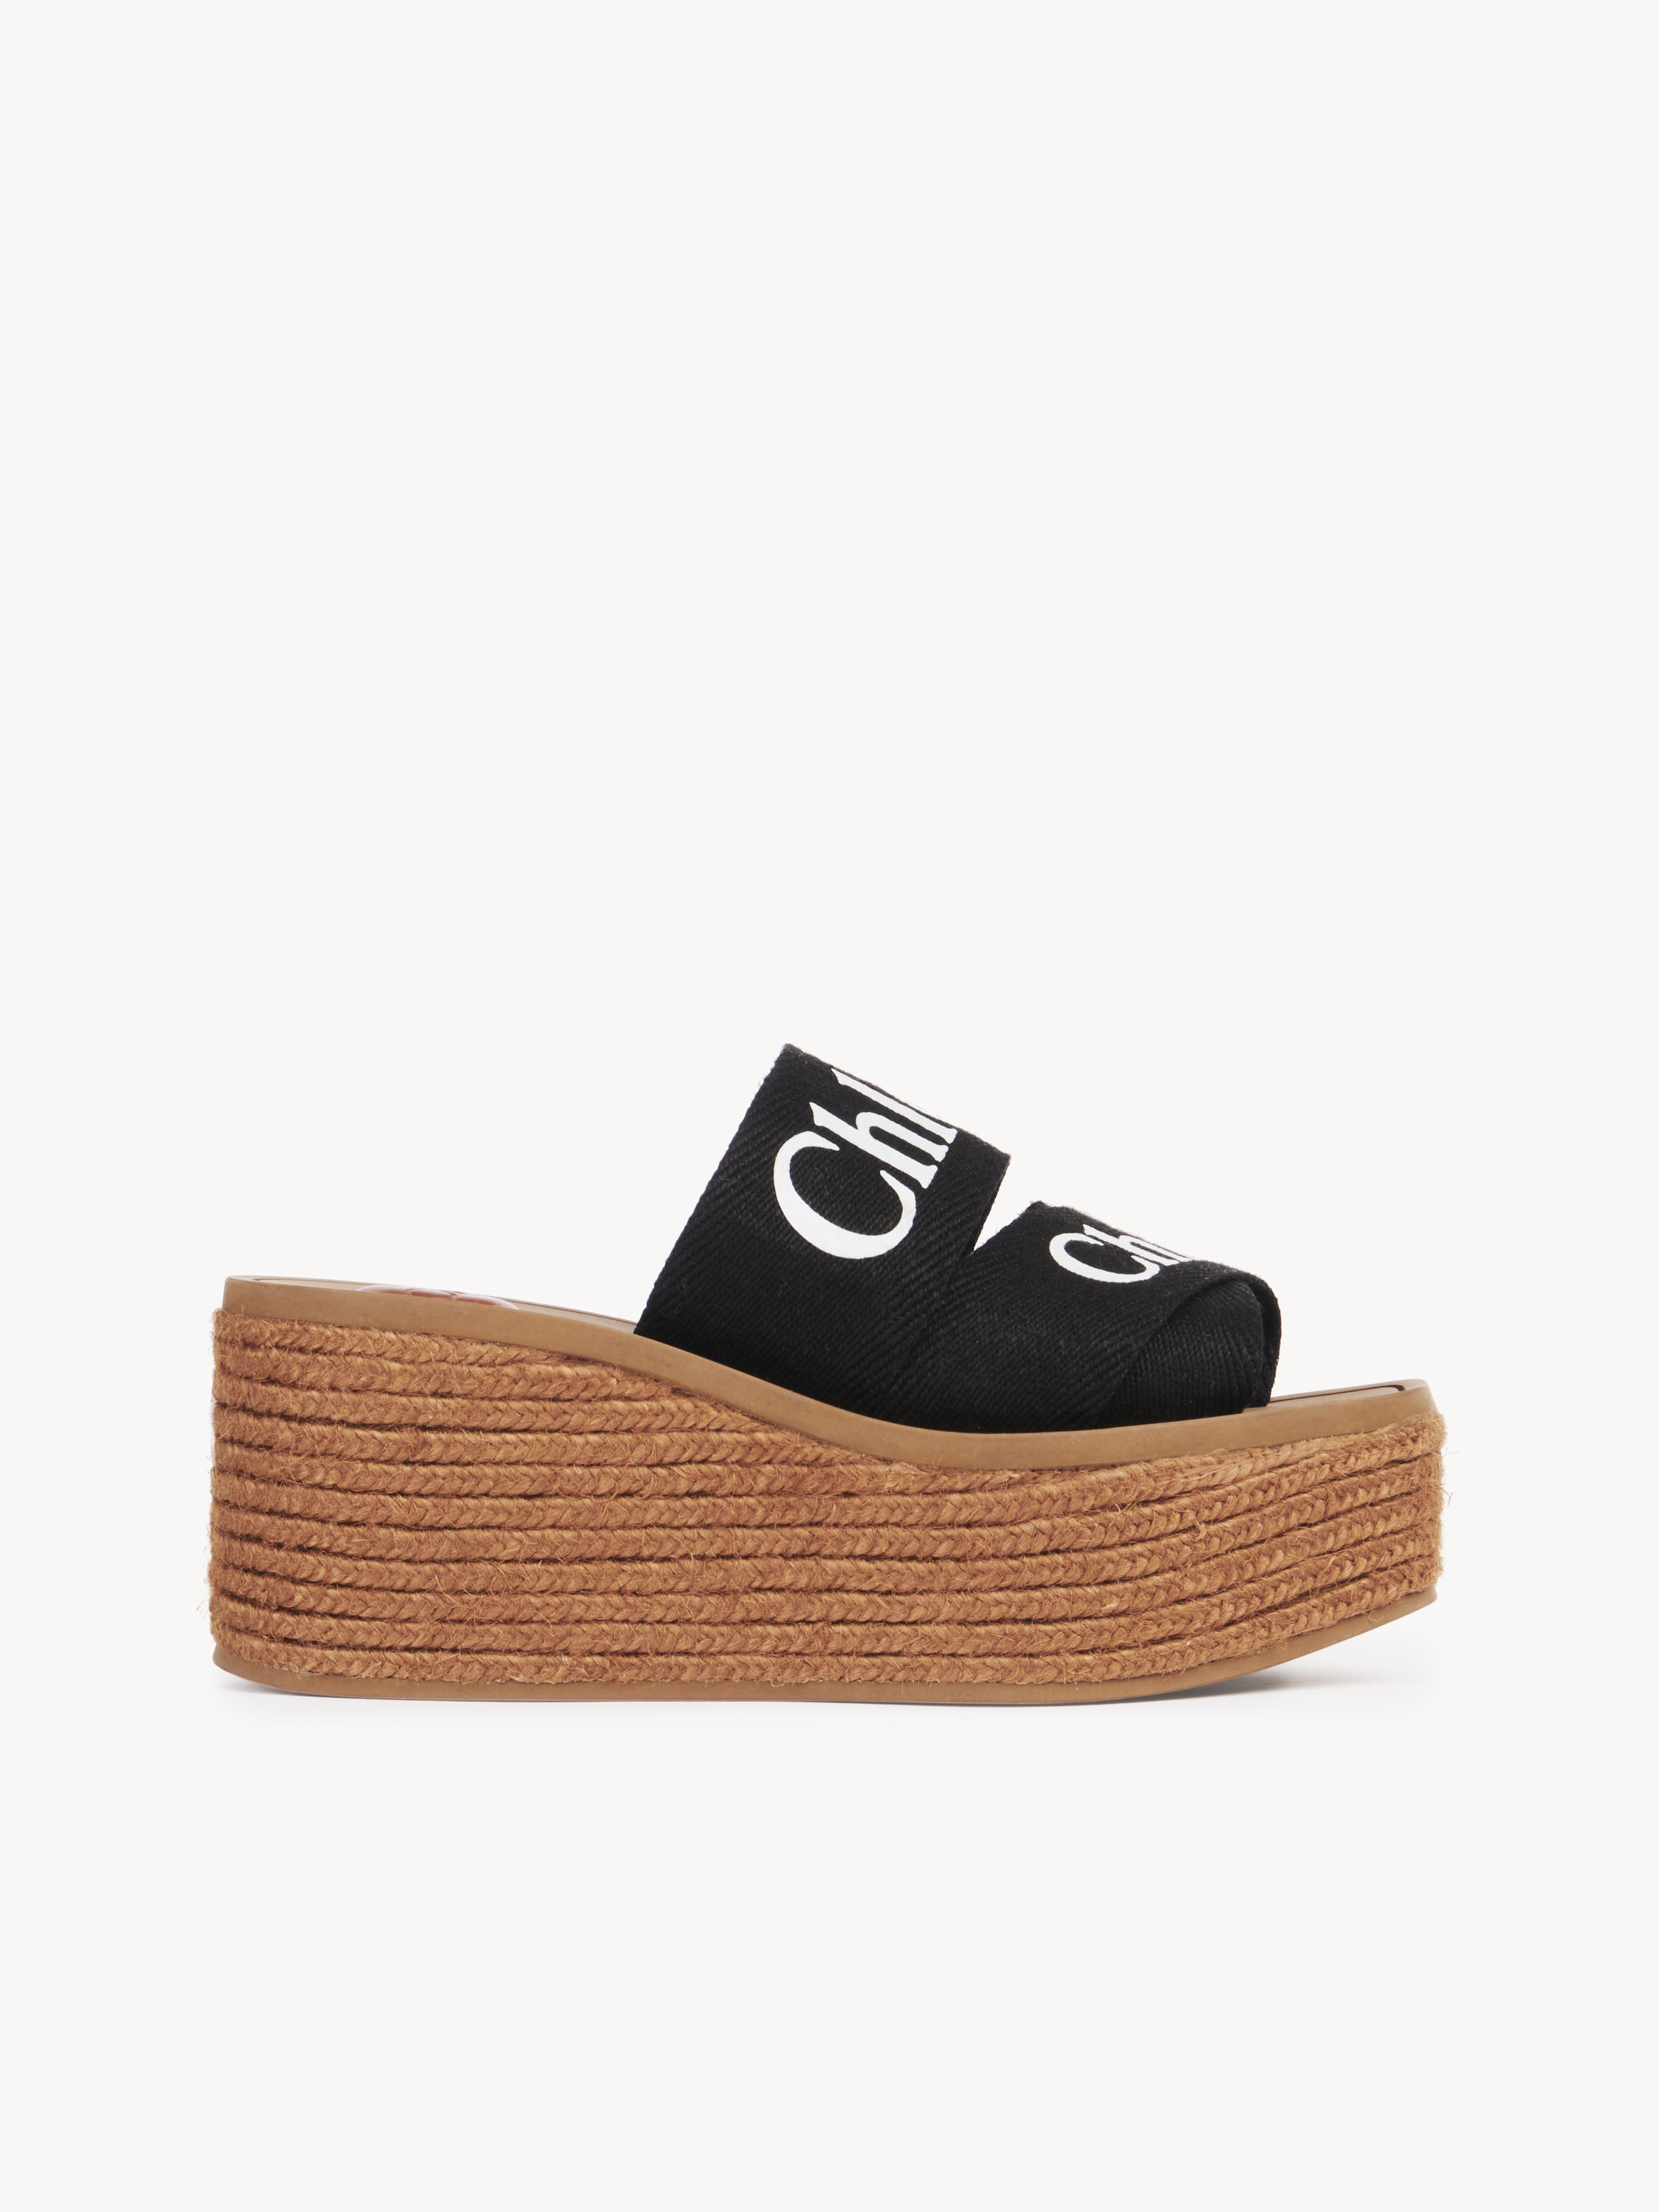 Chloé Mules Espadrilles Woody Femme Noir Taille 40 90% Lin, 10% Polyester, Quercus Suber, Farmed, Coo Spai